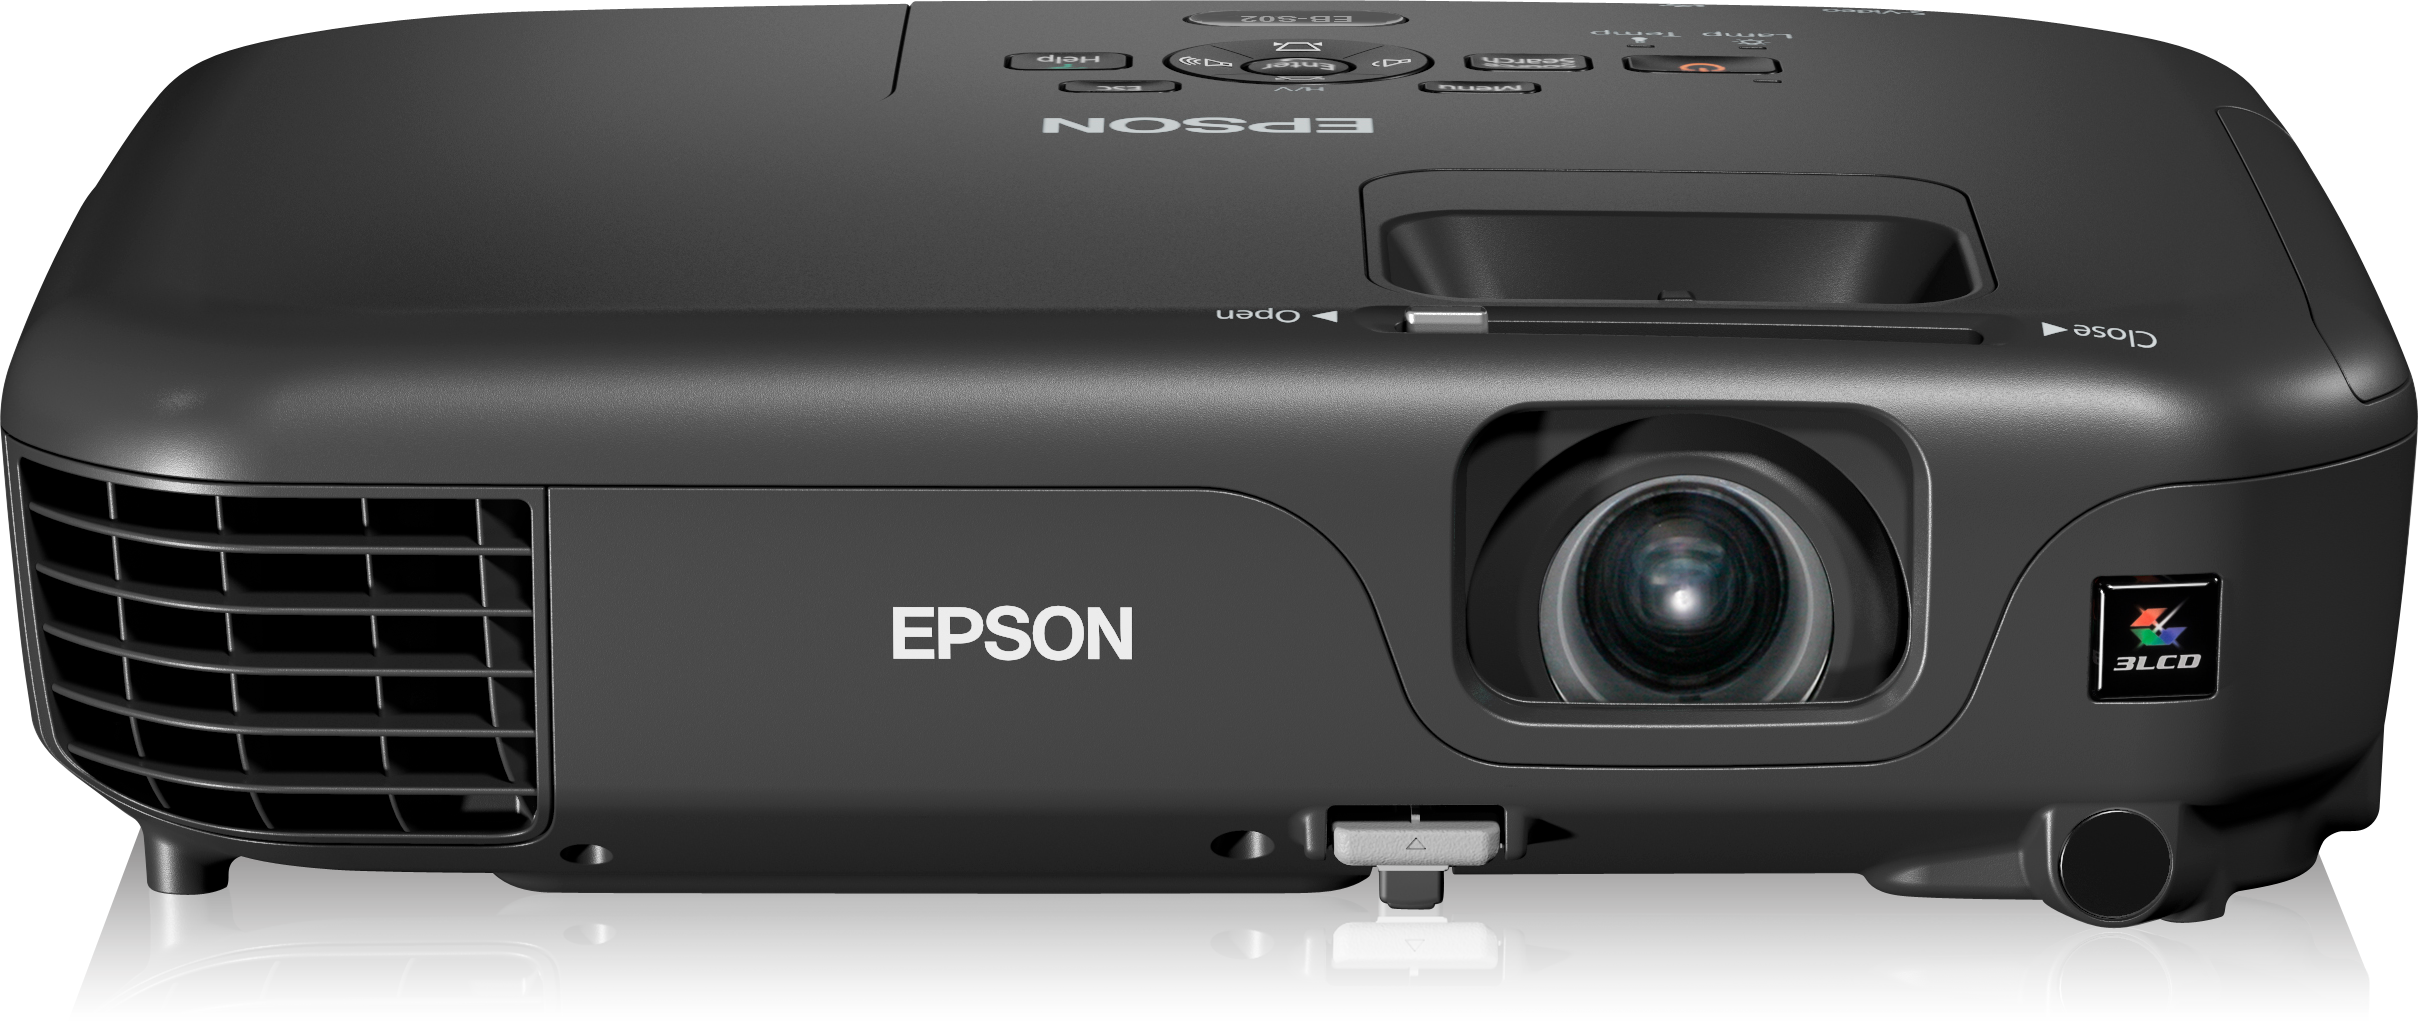 Epson EB-S02 | Mobile | Projectors | Products | Epson Europe